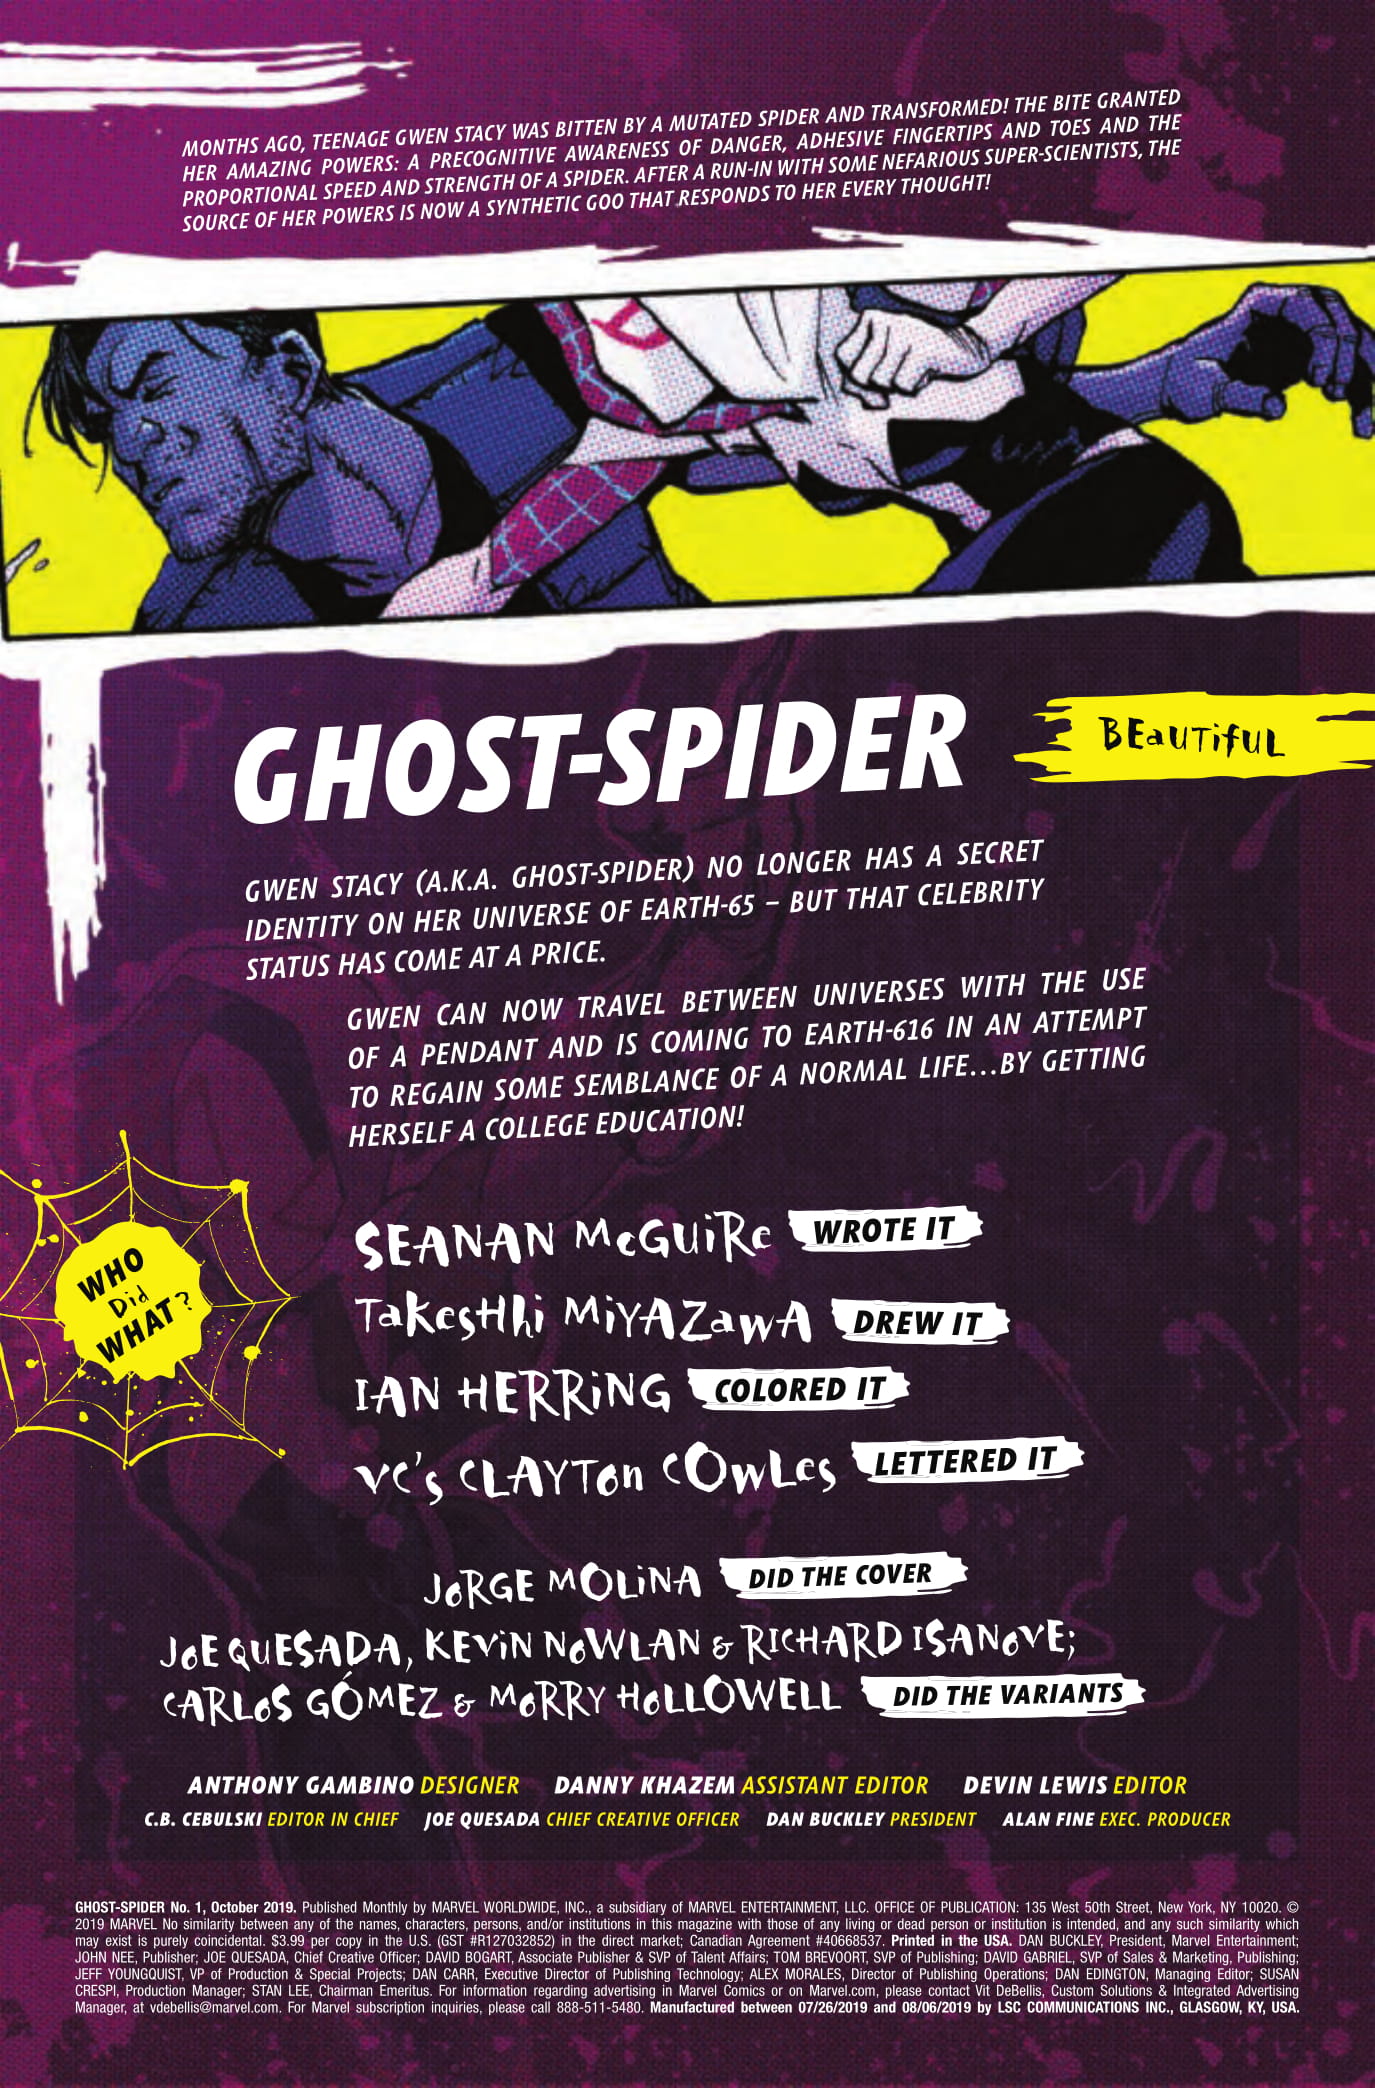 Ghost-Spider #1 credits